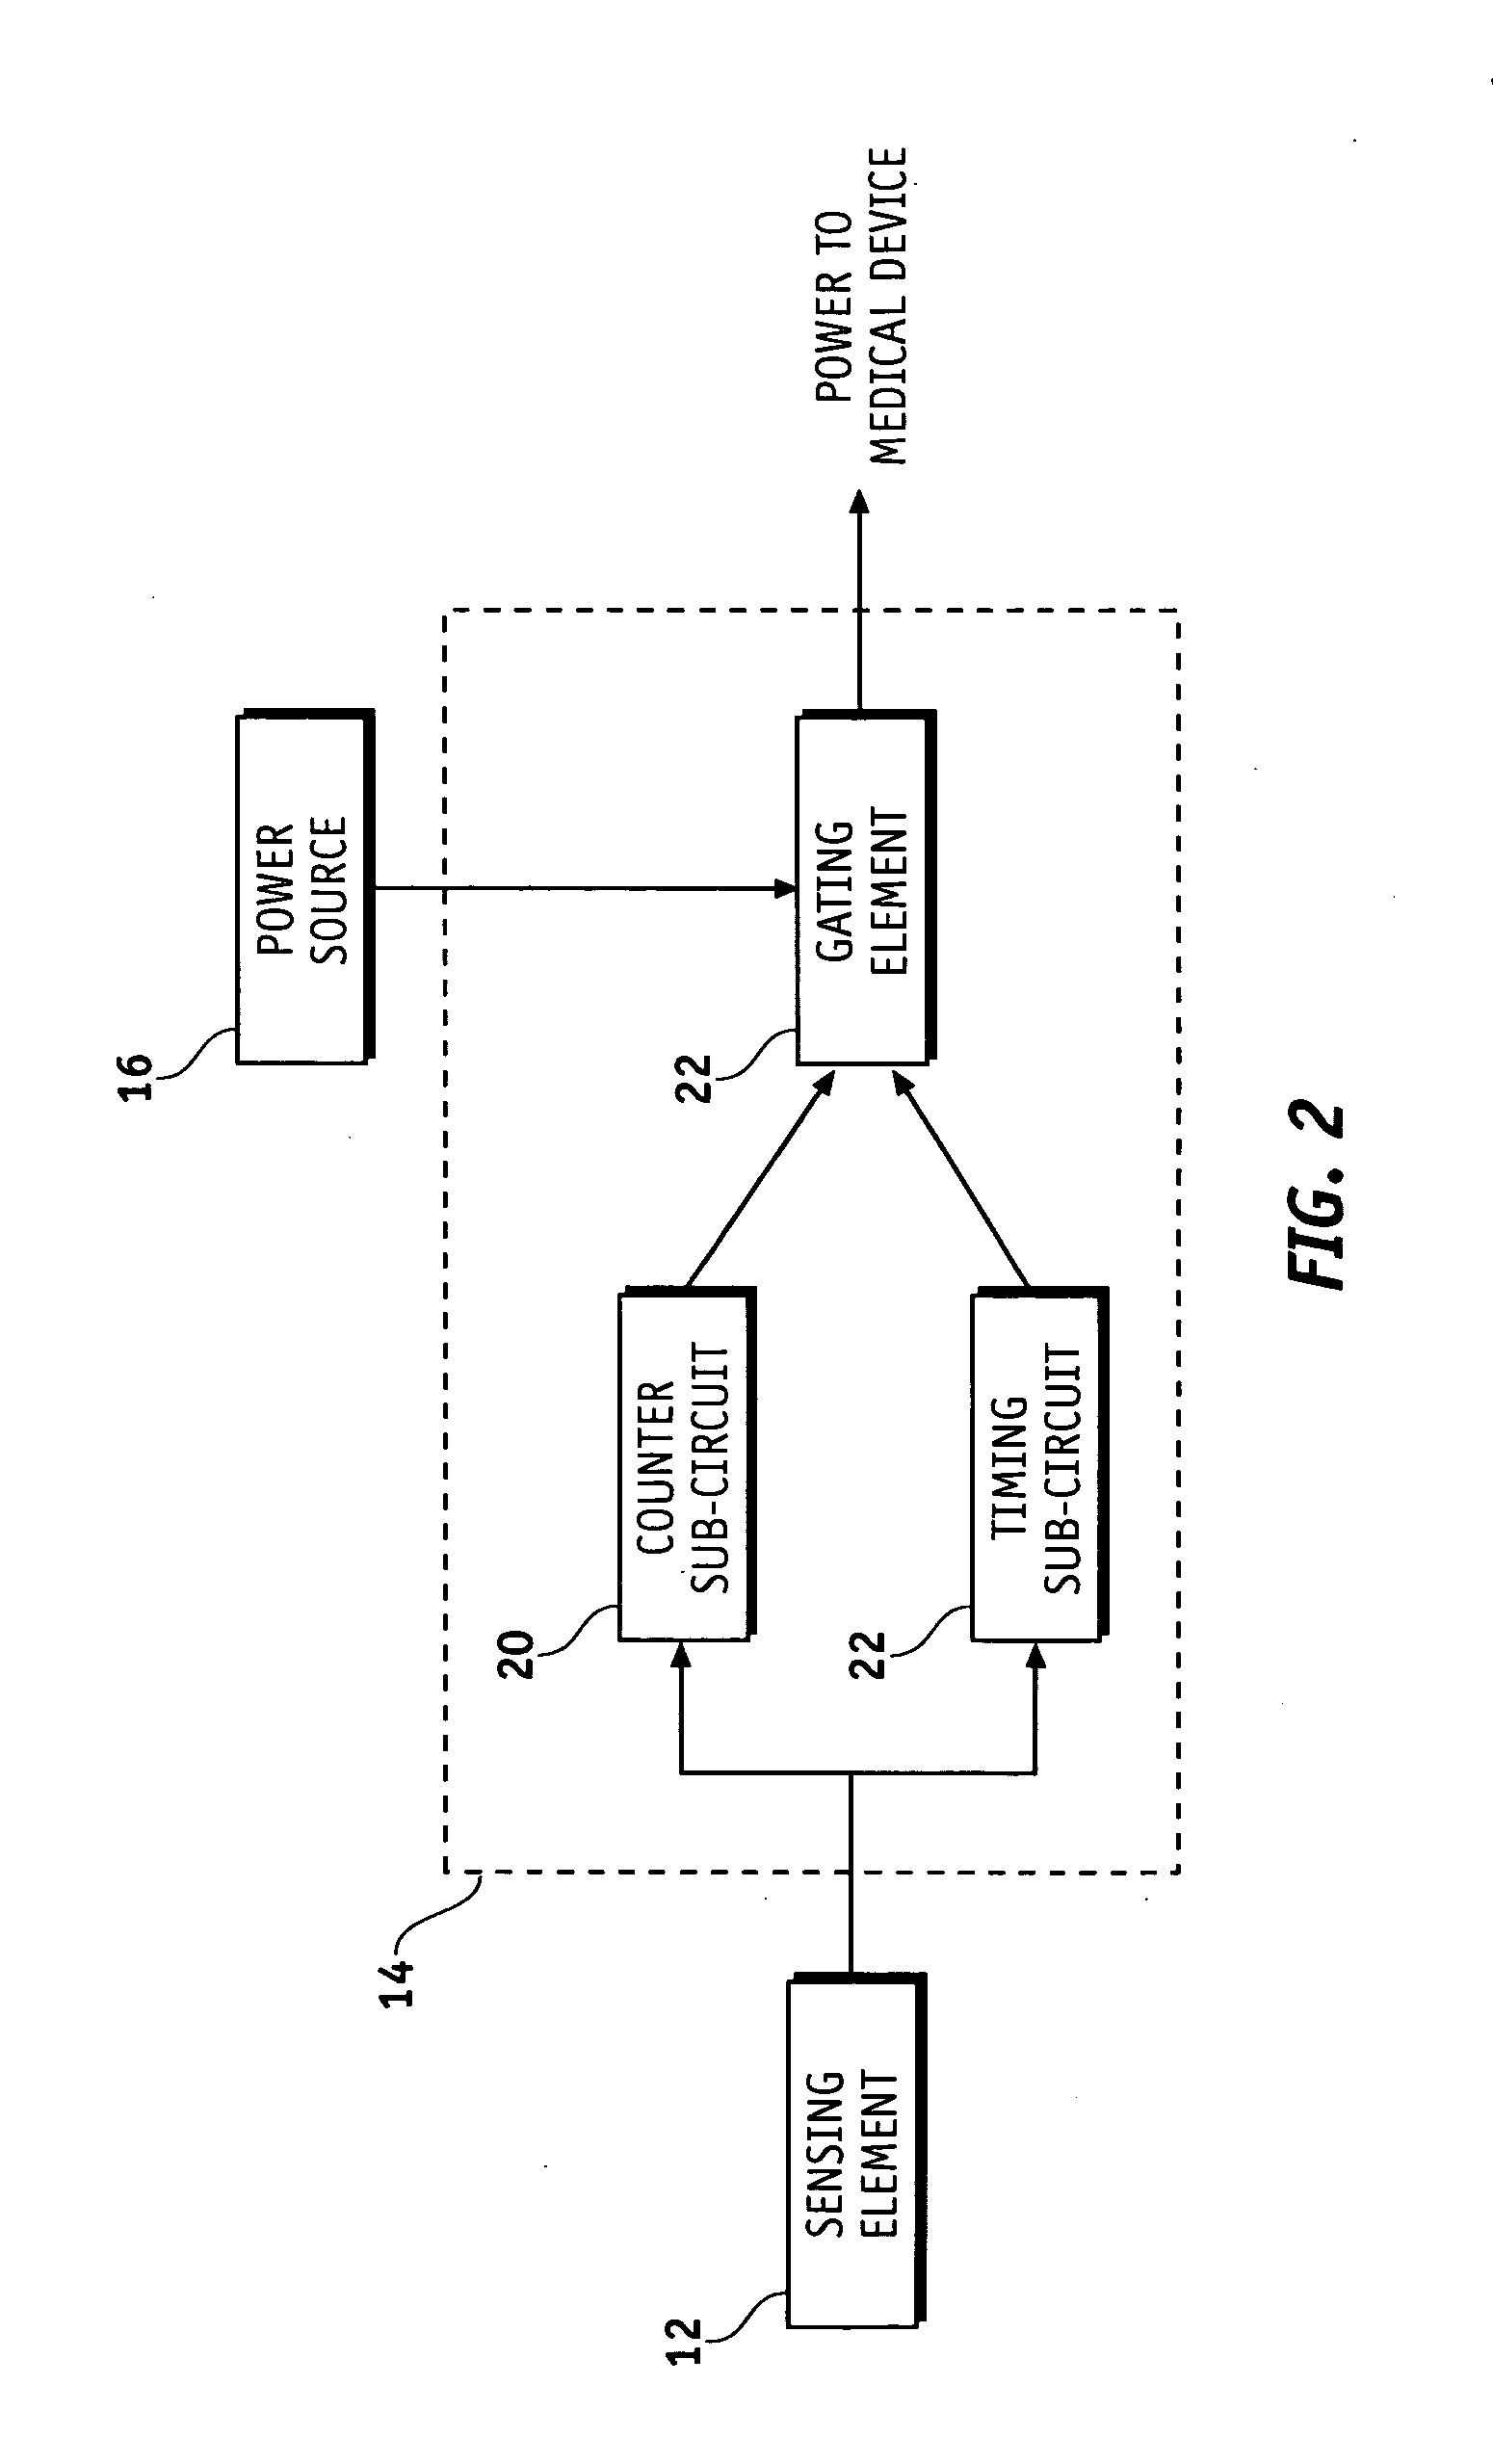 System and apparatus for remote activation of implantable medical devices